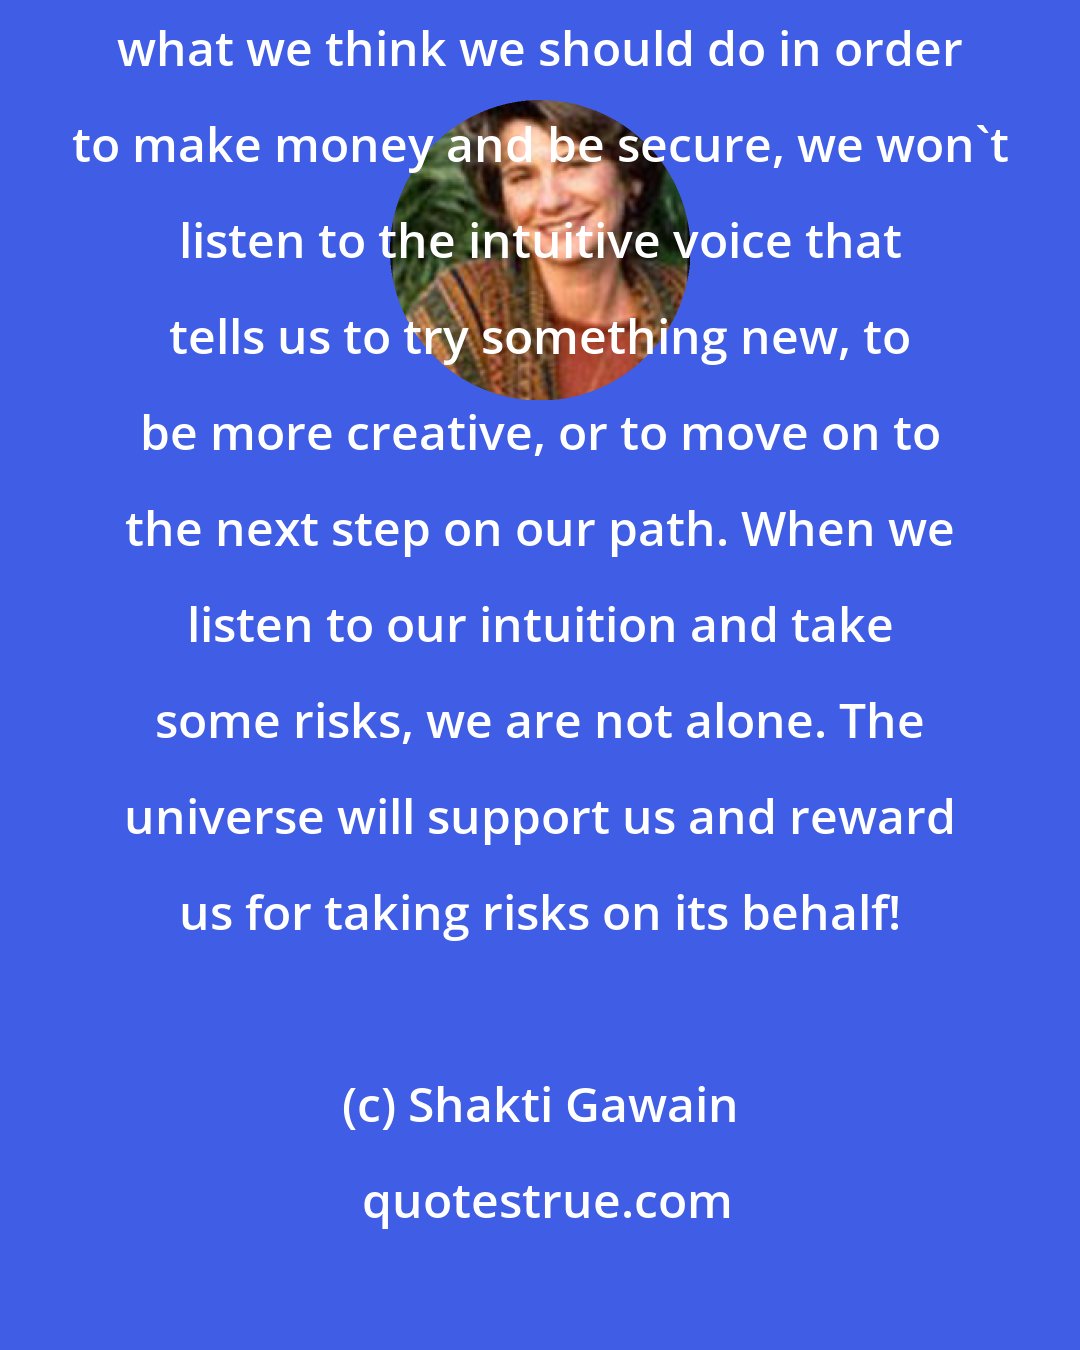 Shakti Gawain: Be willing to take some risks in the areas of work and money. If we do only what we think we should do in order to make money and be secure, we won't listen to the intuitive voice that tells us to try something new, to be more creative, or to move on to the next step on our path. When we listen to our intuition and take some risks, we are not alone. The universe will support us and reward us for taking risks on its behalf!